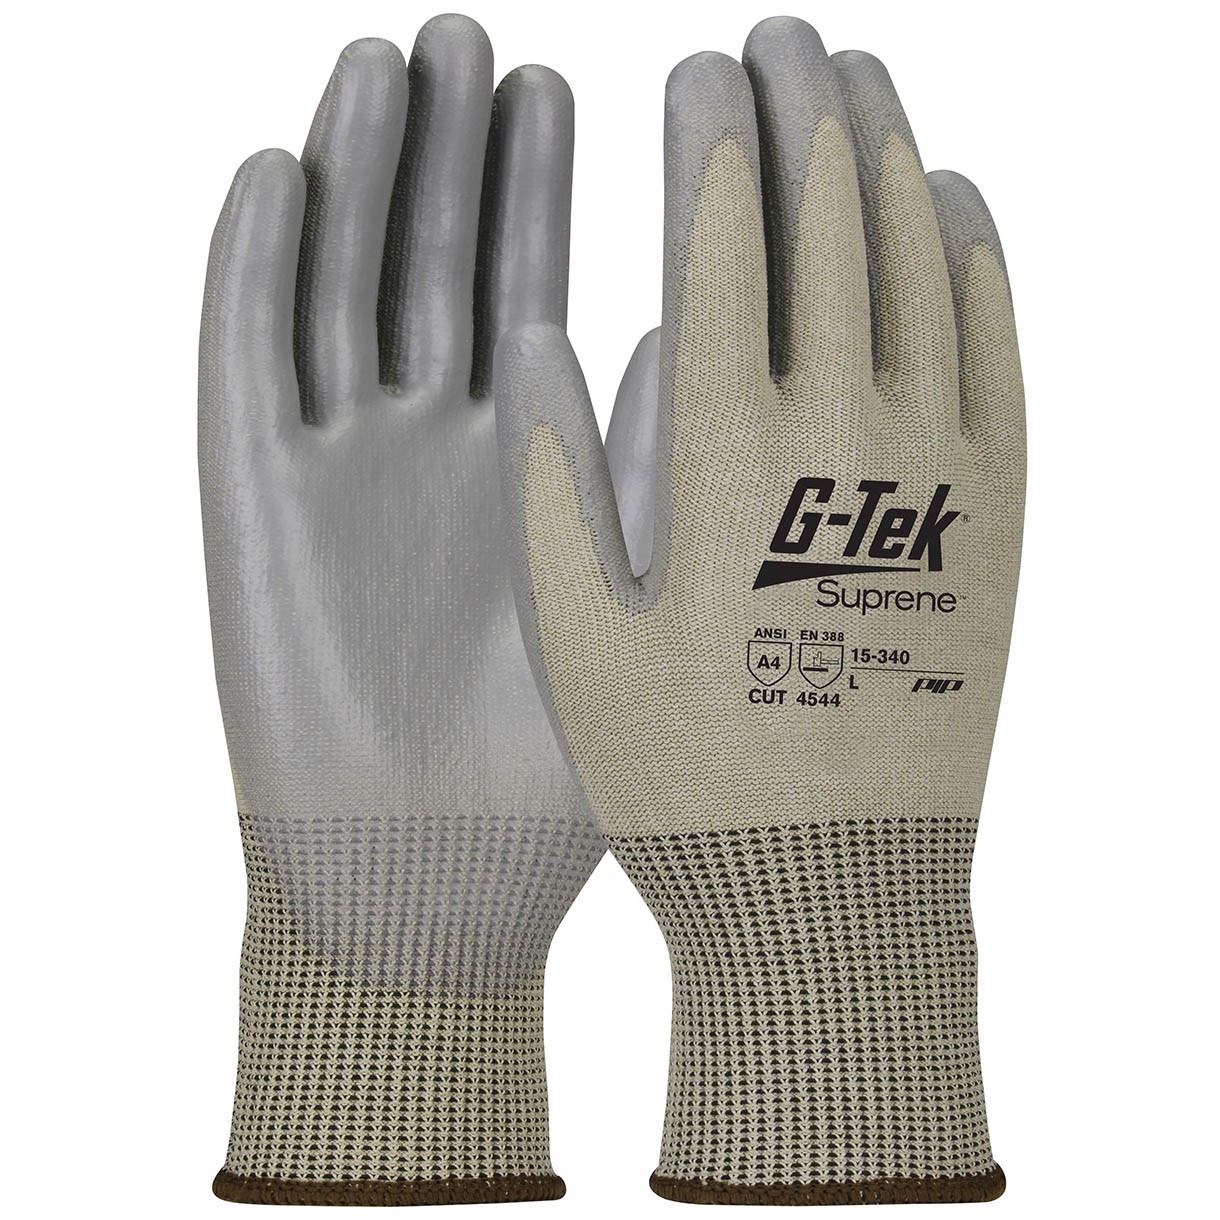 PIP 33-115 Seamless Knit Polyester Glove with Polyurethane Coated Smooth Grip on Palm & Fingers